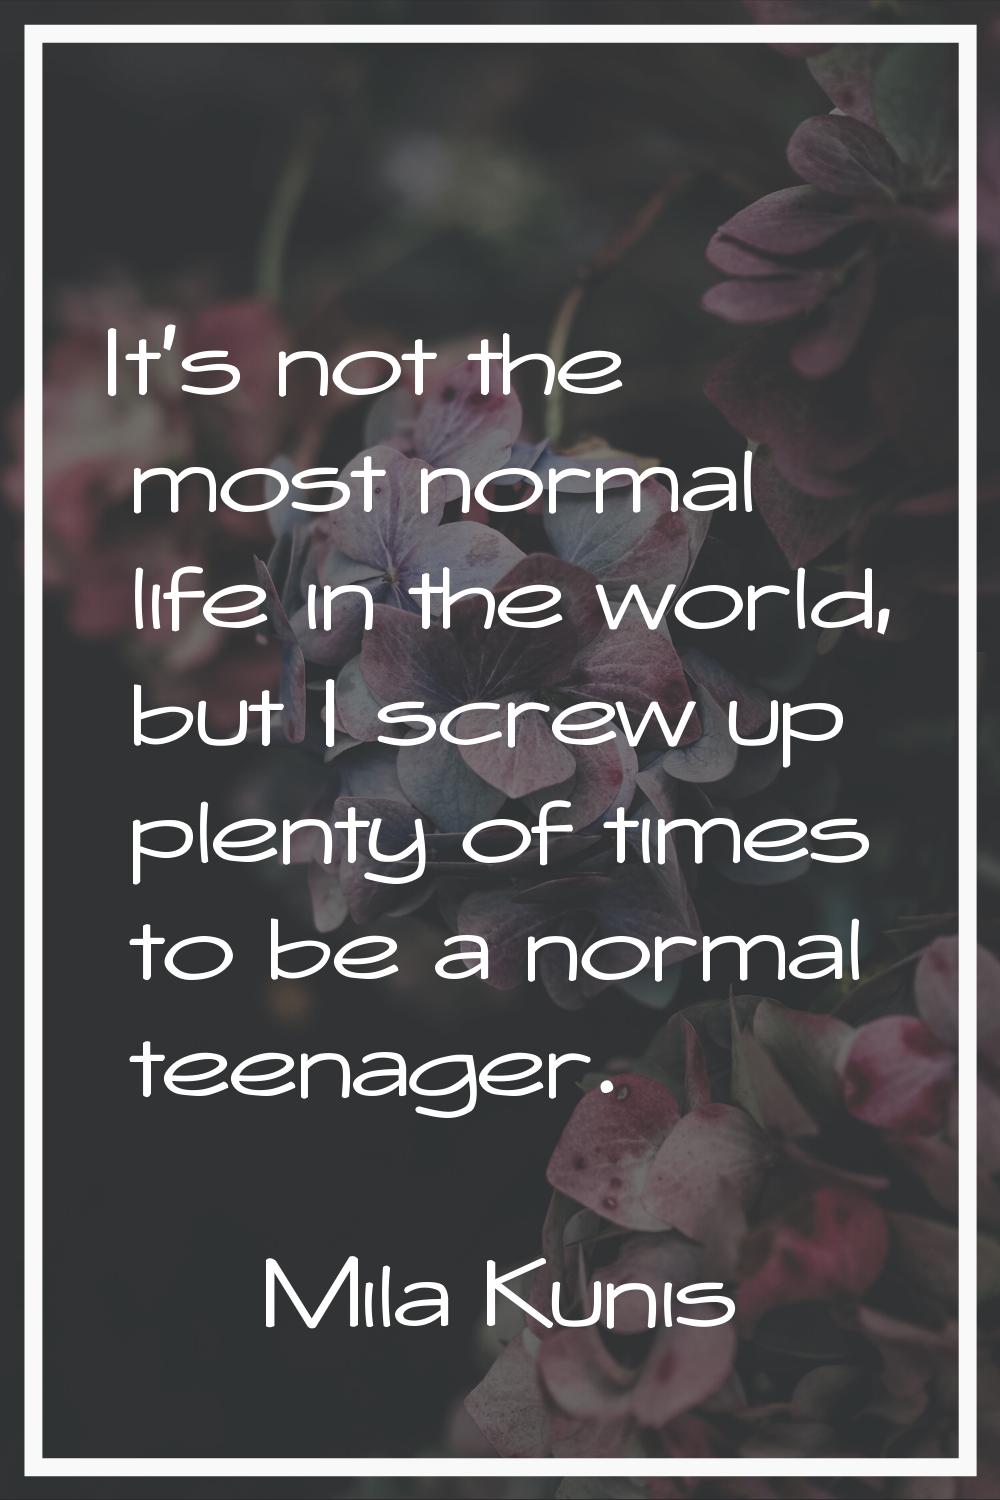 It's not the most normal life in the world, but I screw up plenty of times to be a normal teenager.